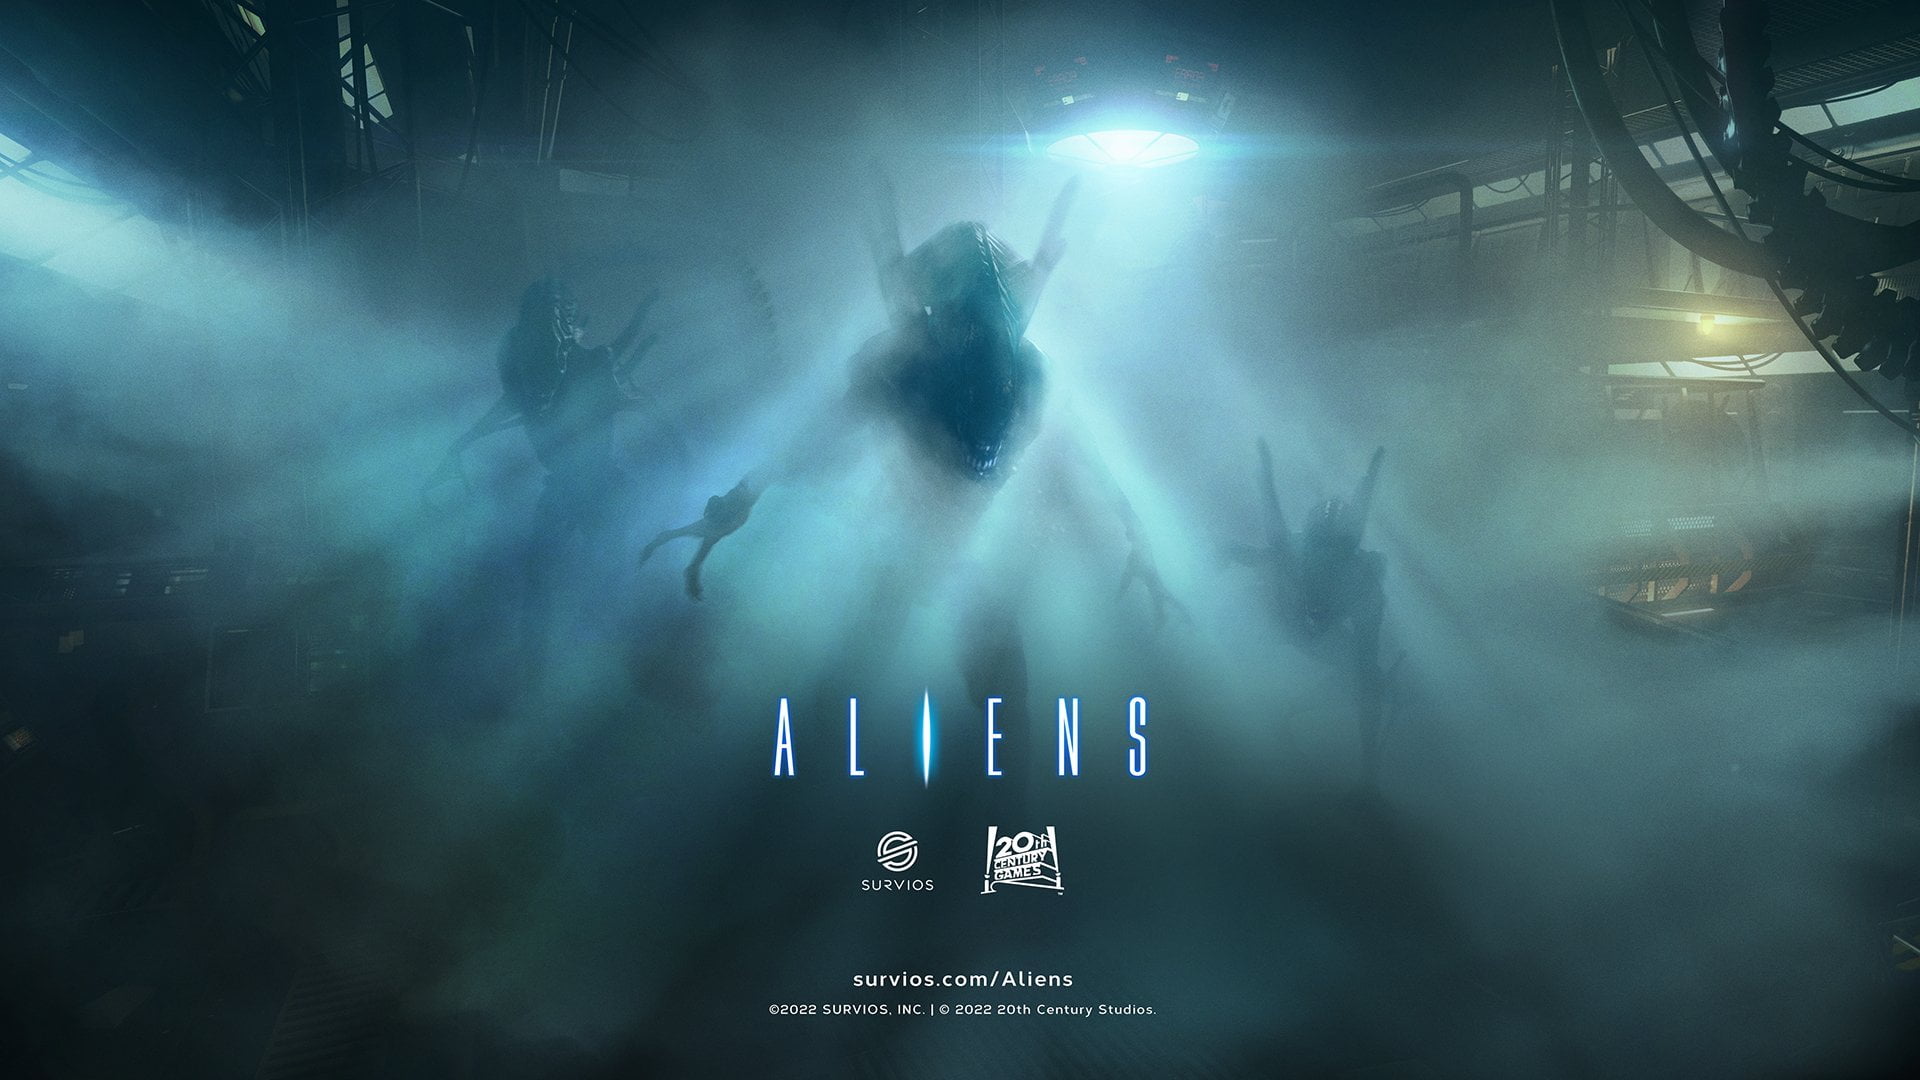 A new Alien game is in the works – and it’s coming for VR